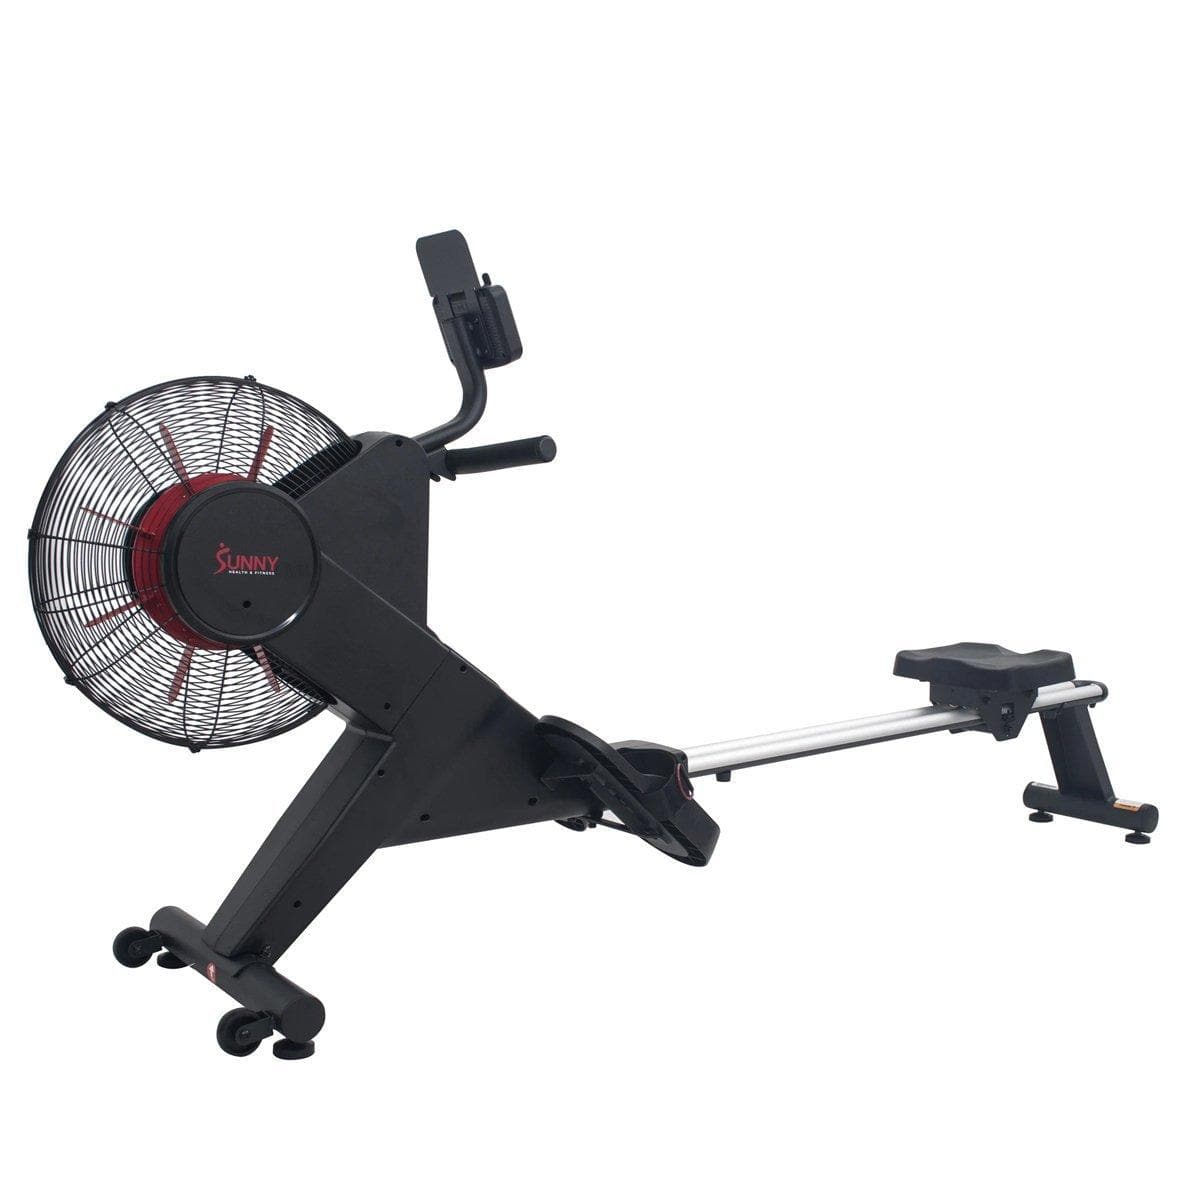 Carbon Premium Air Magnetic Rowing Machine Cardio Training Sunny Health and Fitness 